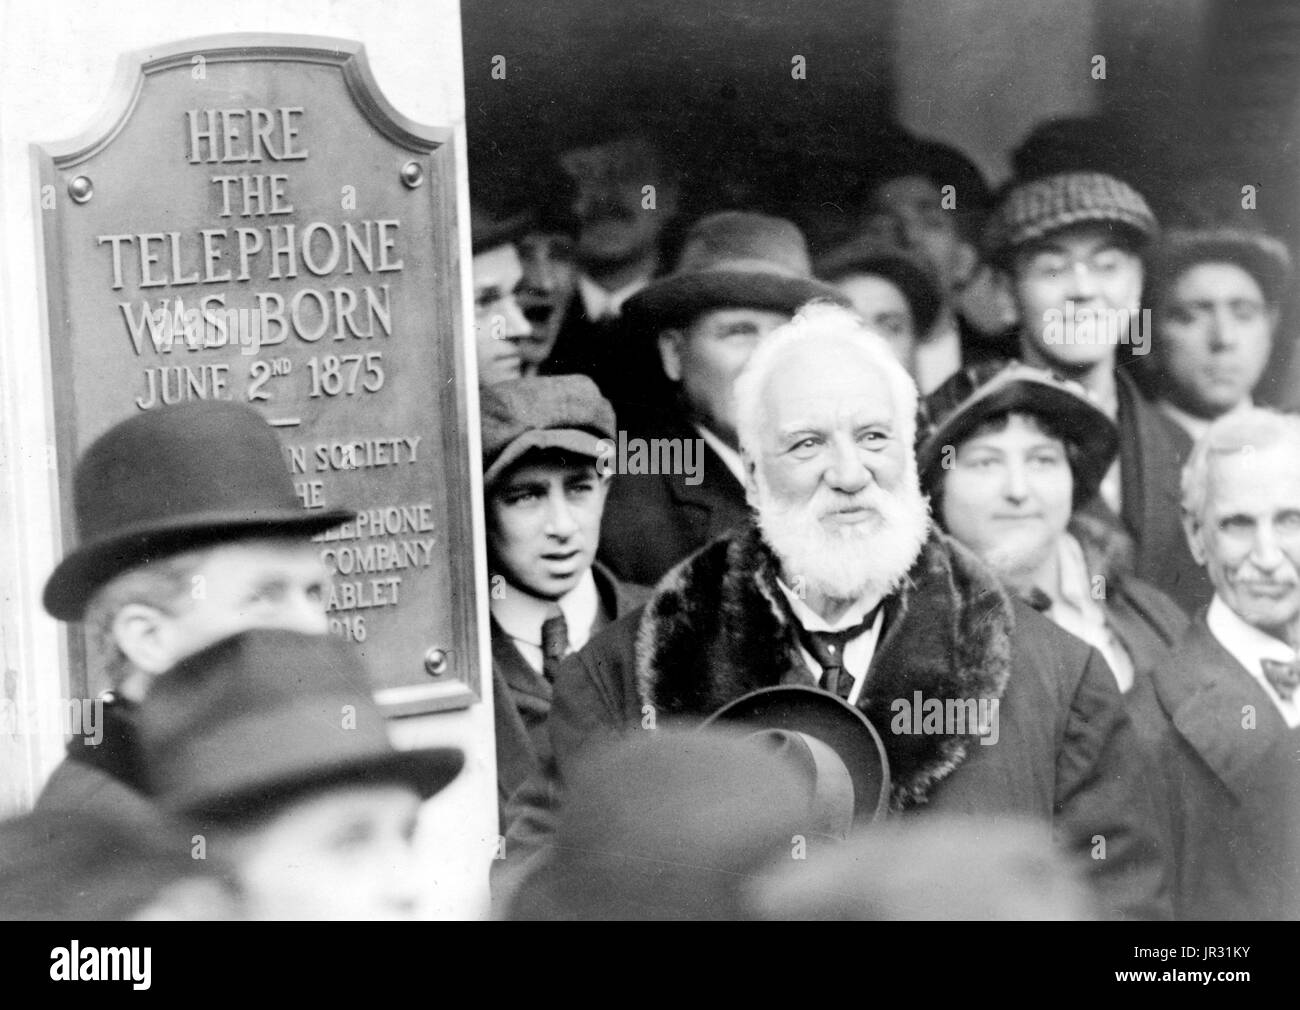 Bell at the unveiling of a plaque commemorating the 1876 invention of the telephone, Boston. Alexander Graham Bell (March 3, 1847 - August 2, 1922) was a Scottish-American speech therapist and inventor of the telephone. Bell followed his father and grandfather into the speech therapy profession, but also studied sound waves and the mechanics of speech. By 1871, he had moved to the United States, becoming professor of vodal physiology in Boston. There he performed his experiments in converting sound waves into electrical impulses for transmission down wires. In 1876, he patented the telephone a Stock Photo